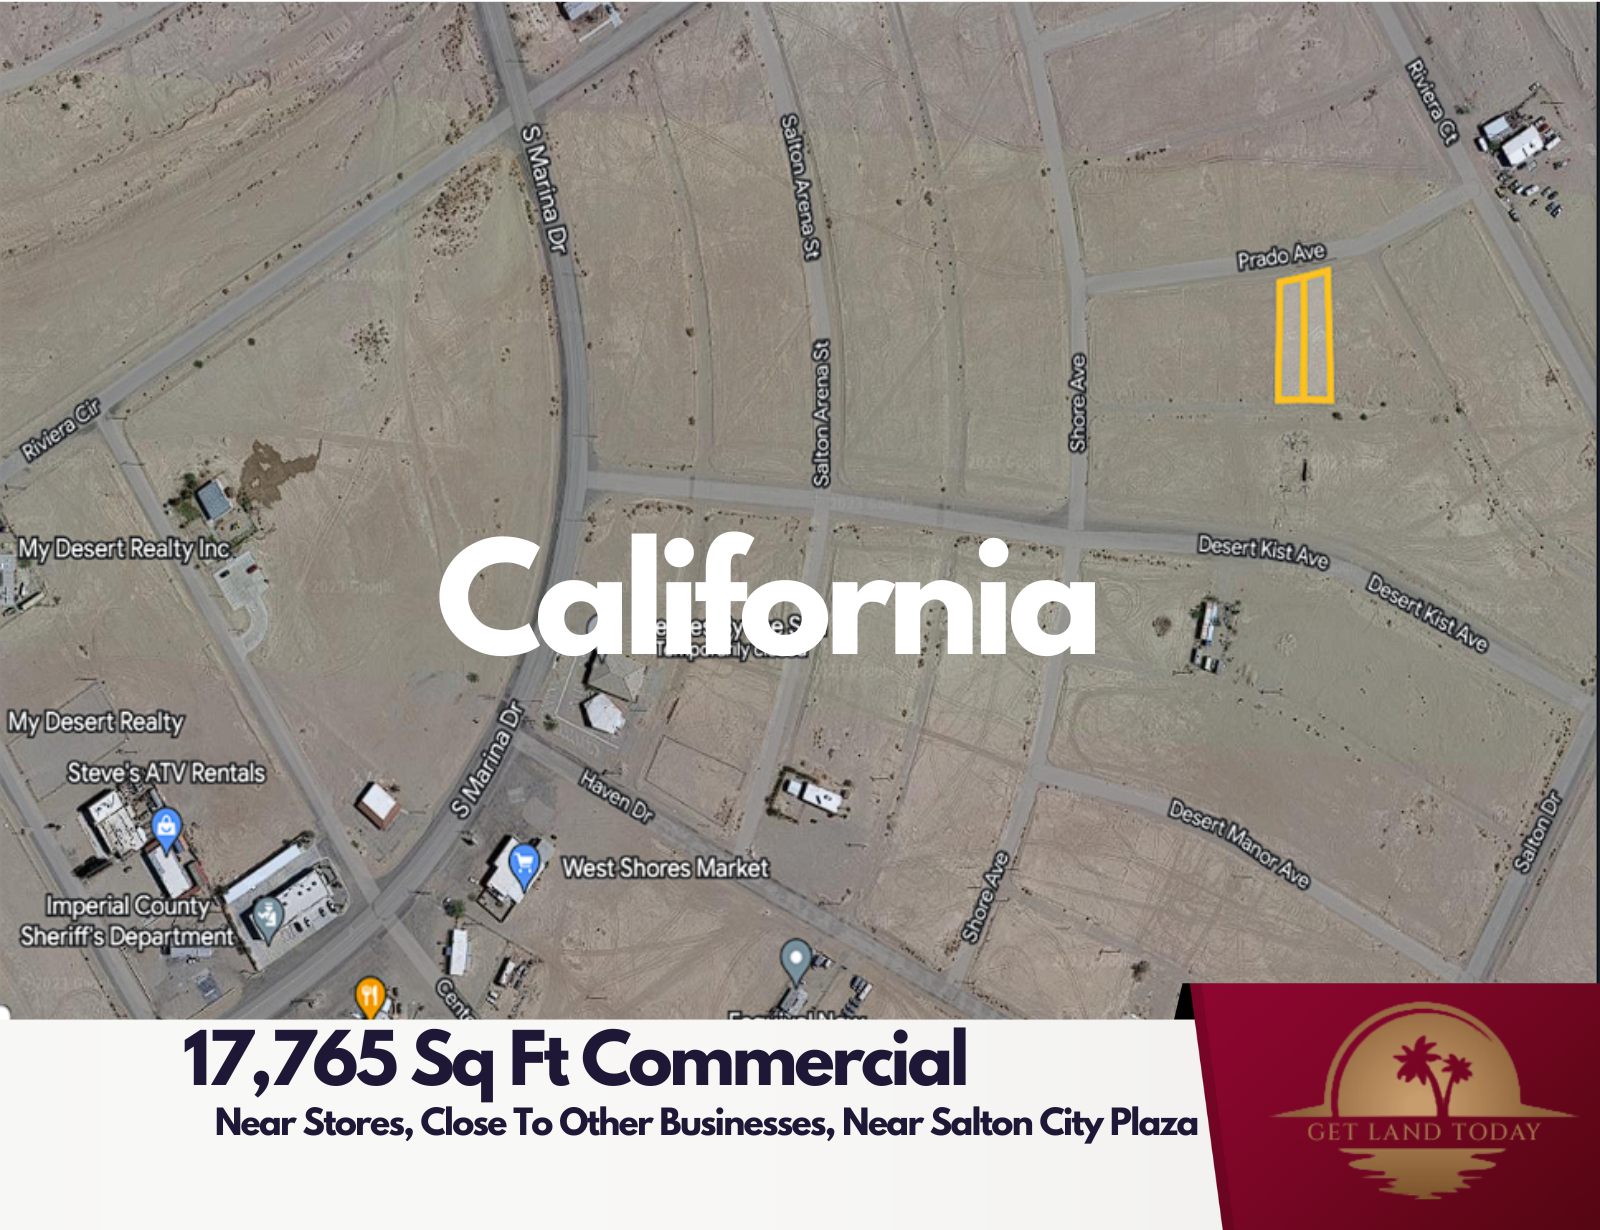 Double the Commercial Potential - Prime Location Near Stores with Low Monthly Payments! APN: 015-282-007-000 & 015-282-008-000 - Get Land Today